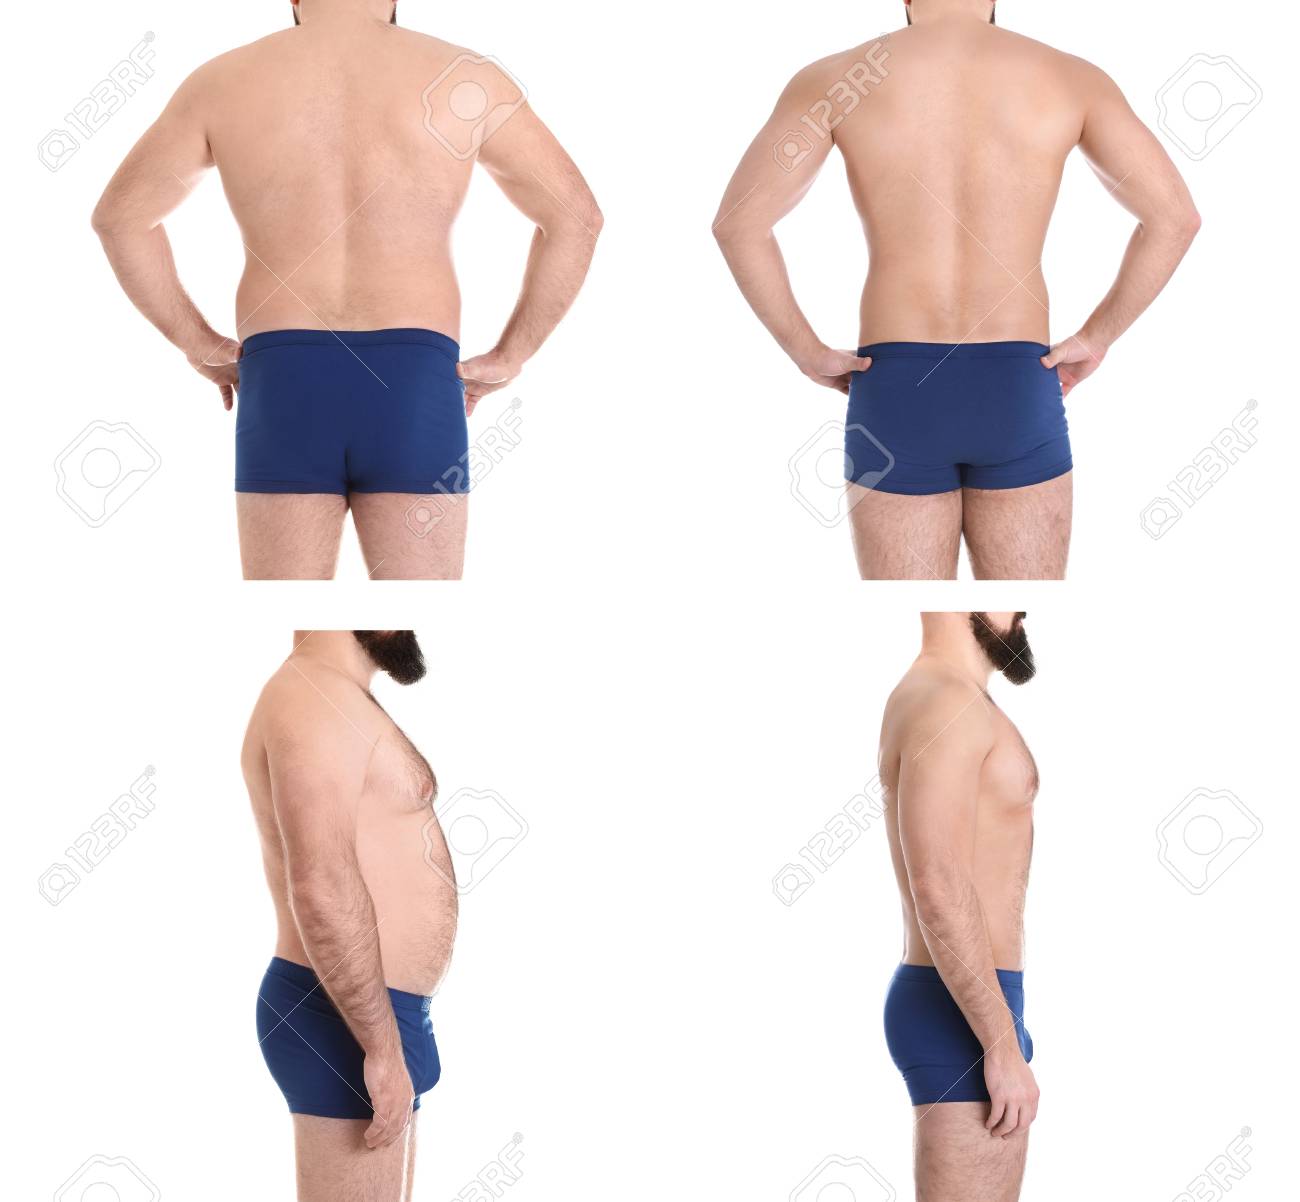 Overweight Man Before And After Weight Loss On White Background